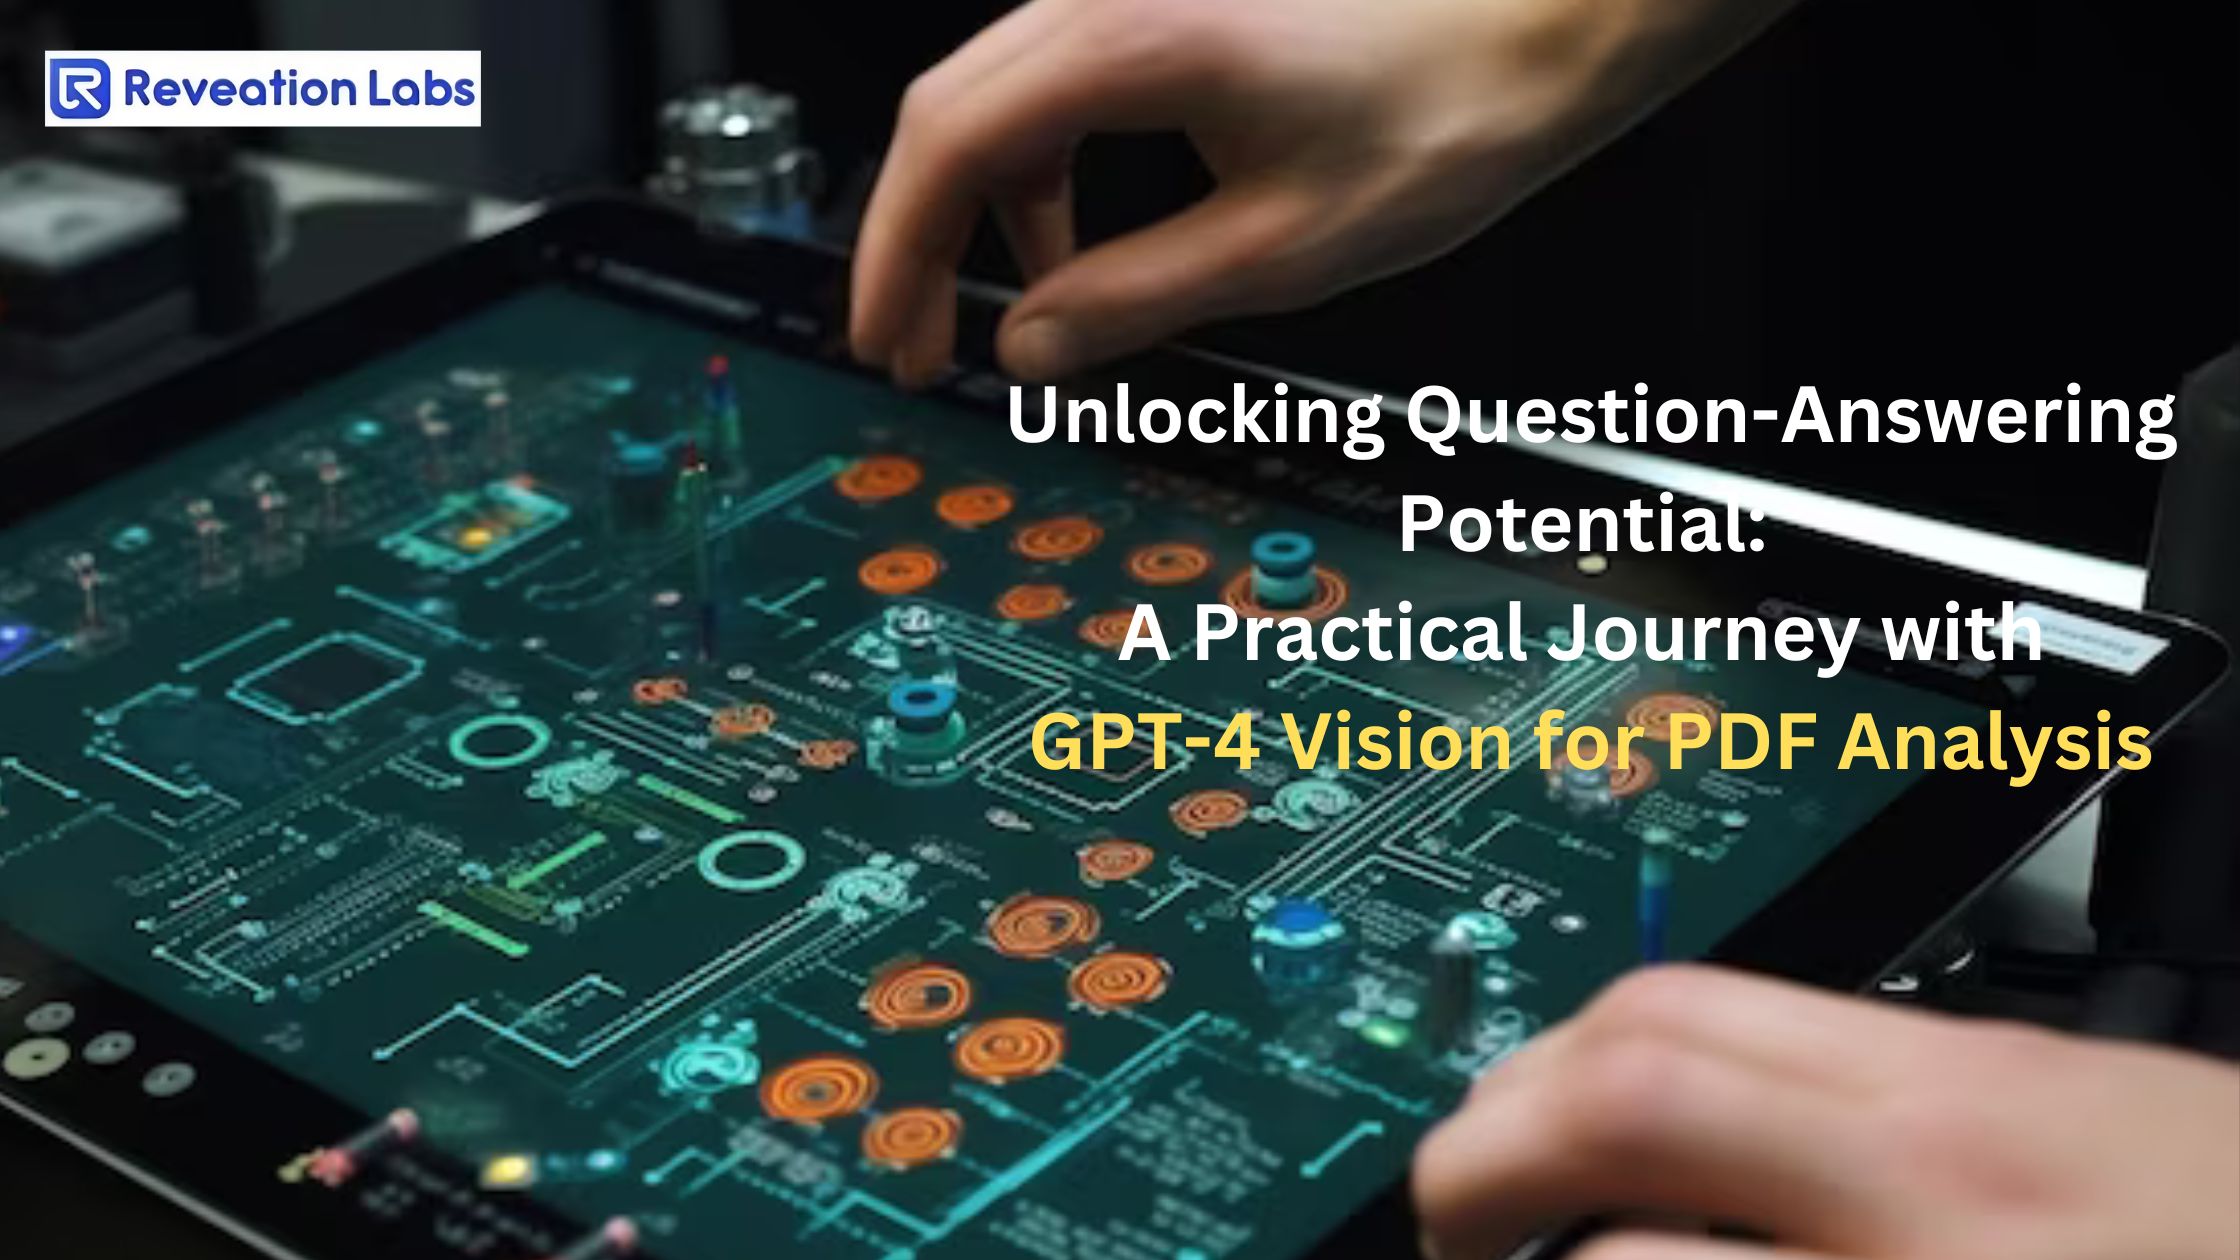 Unlocking Question-Answering Potential: Practical Journey with GPT-4 Vision for PDF Analysis